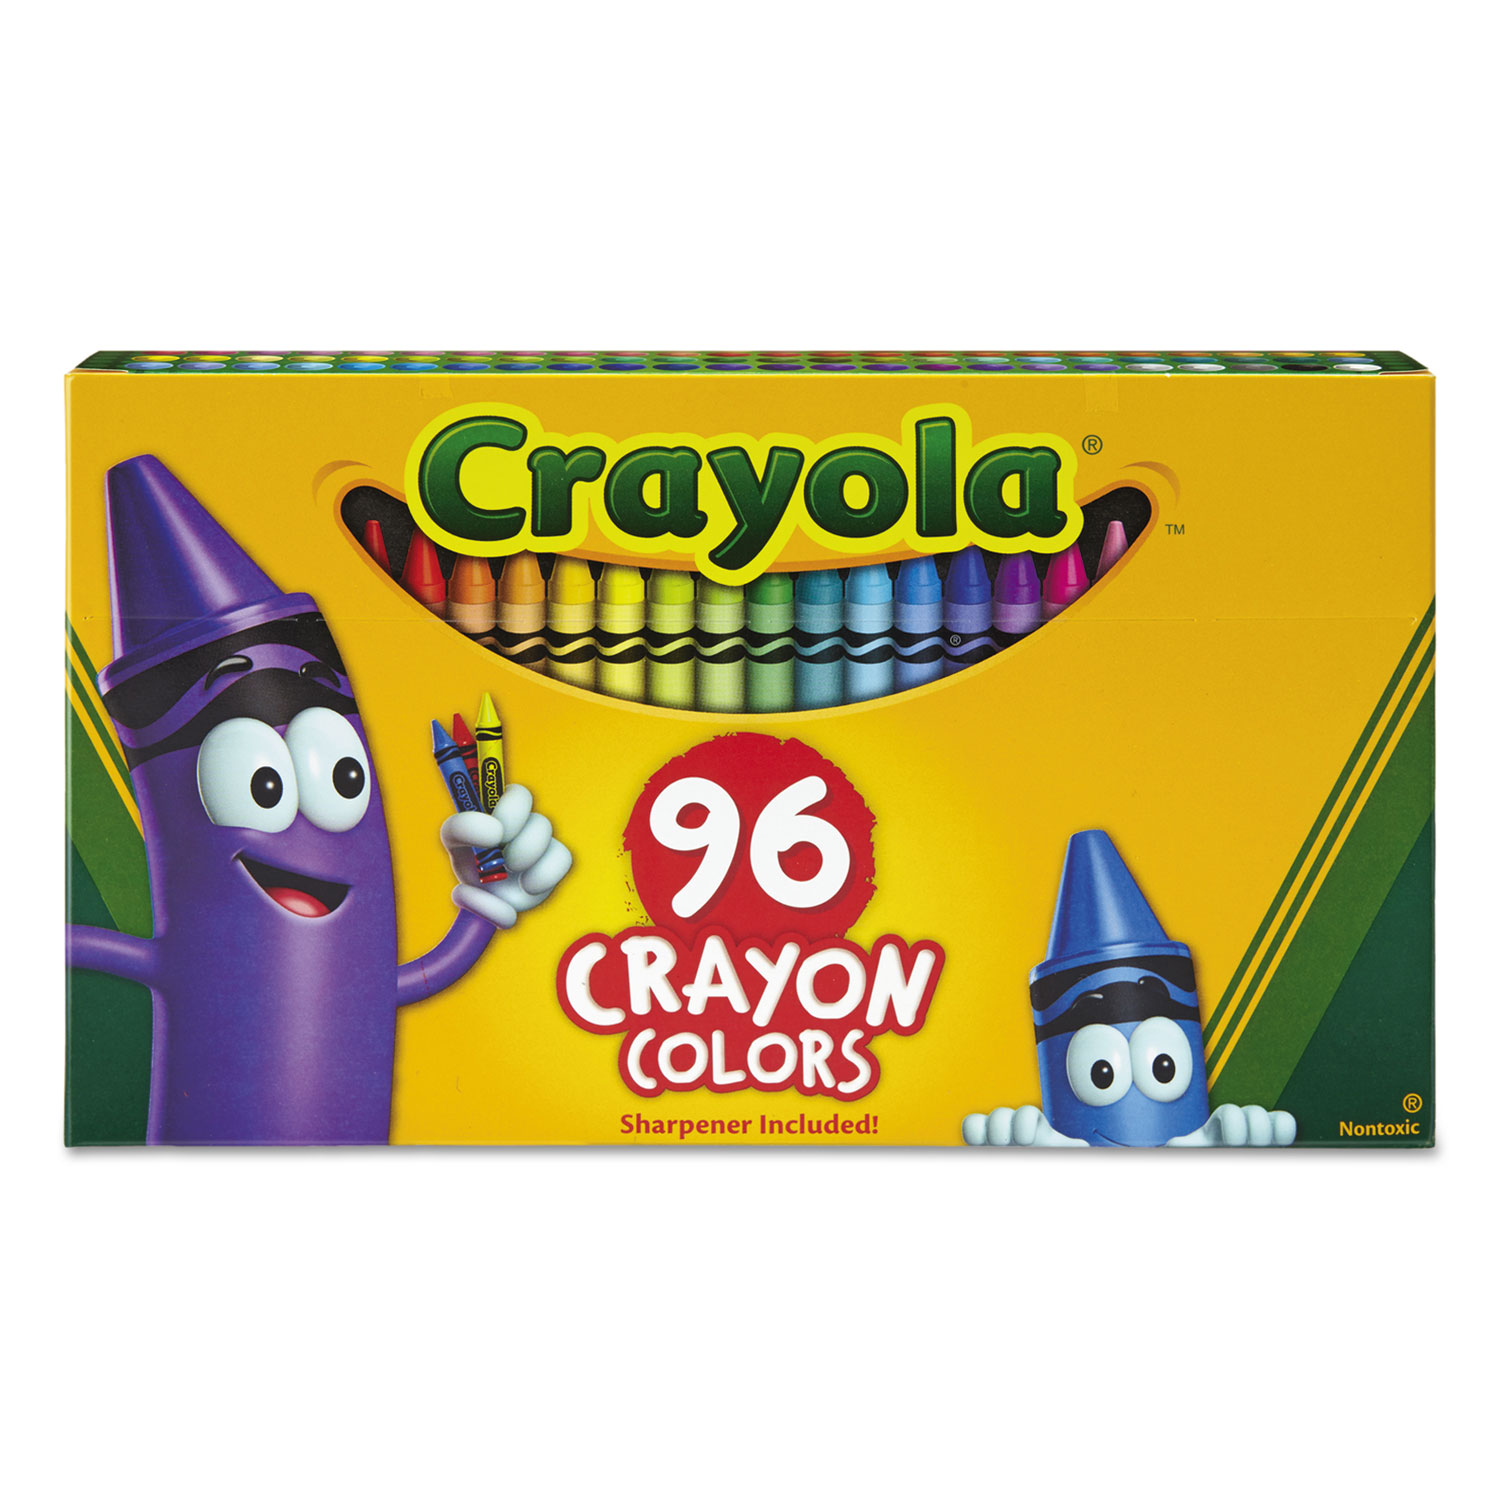 Crayola Classic Color Crayons In Flip-Top Pack With Sharpener, 96 Colors/Pack